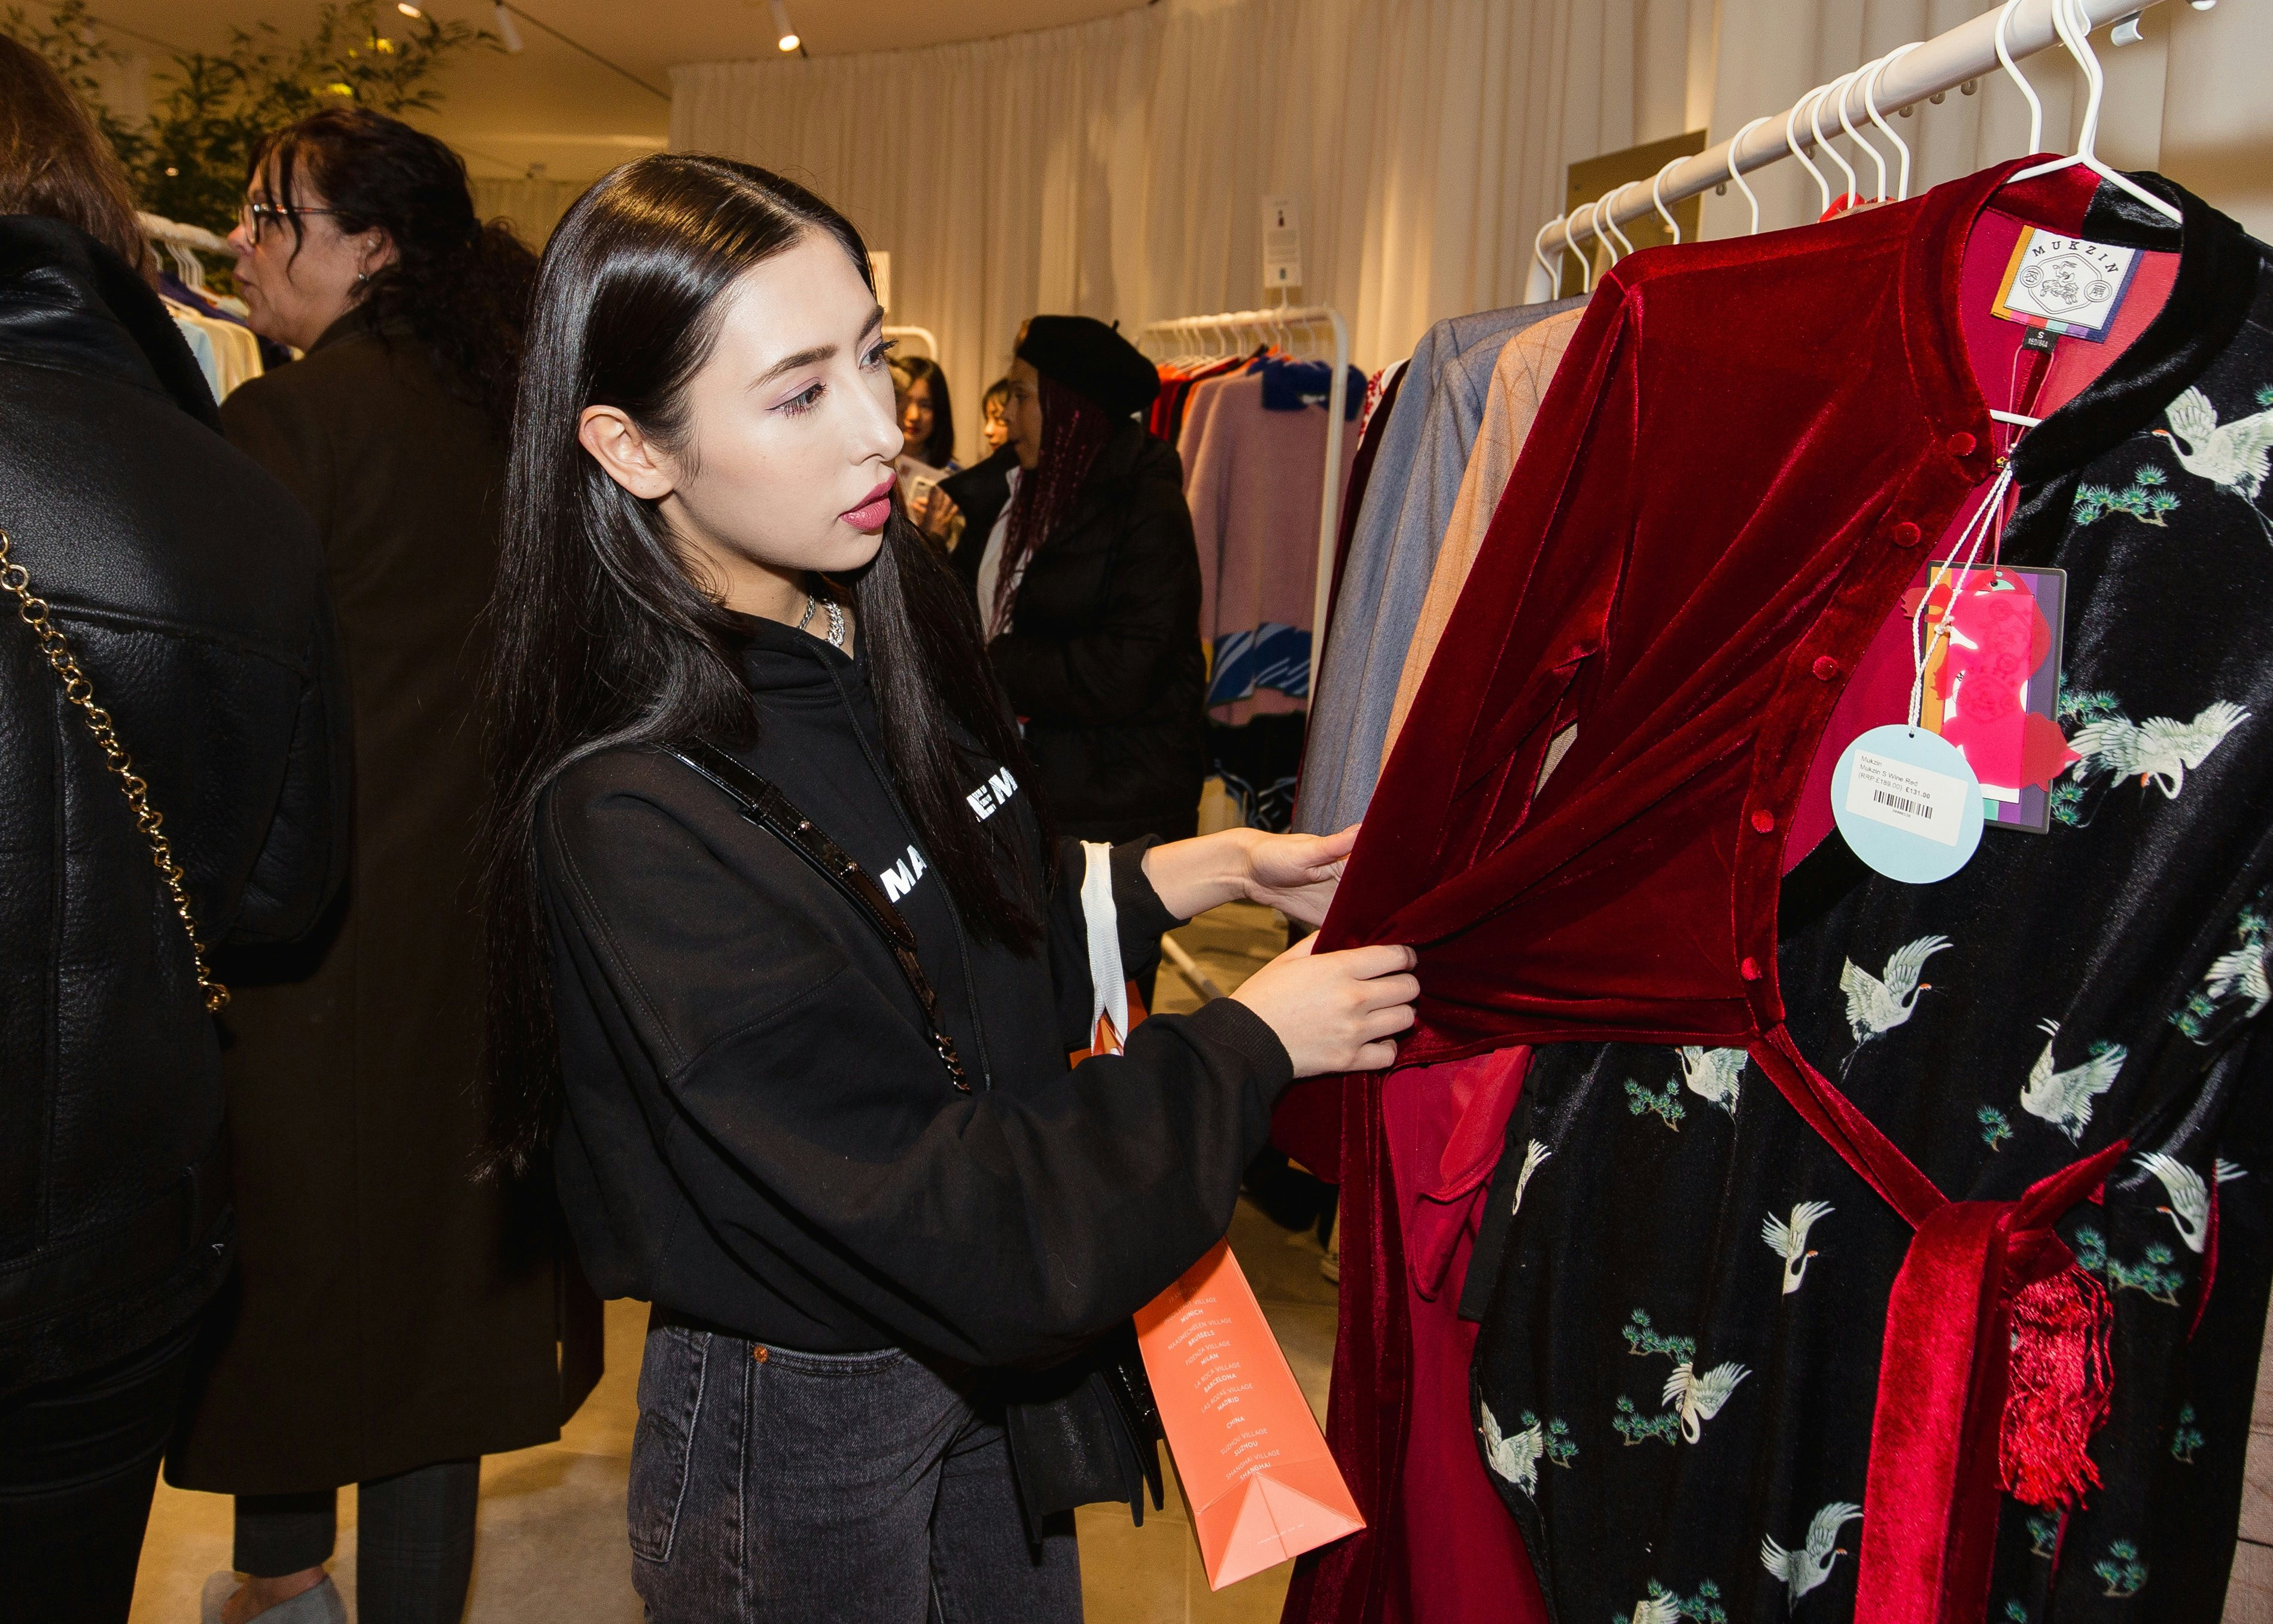 Super influencer Susie Bubble launched her first-ever pop-up boutique at Value Retail’s Bicester Village Shopping Collection. Courtesy image